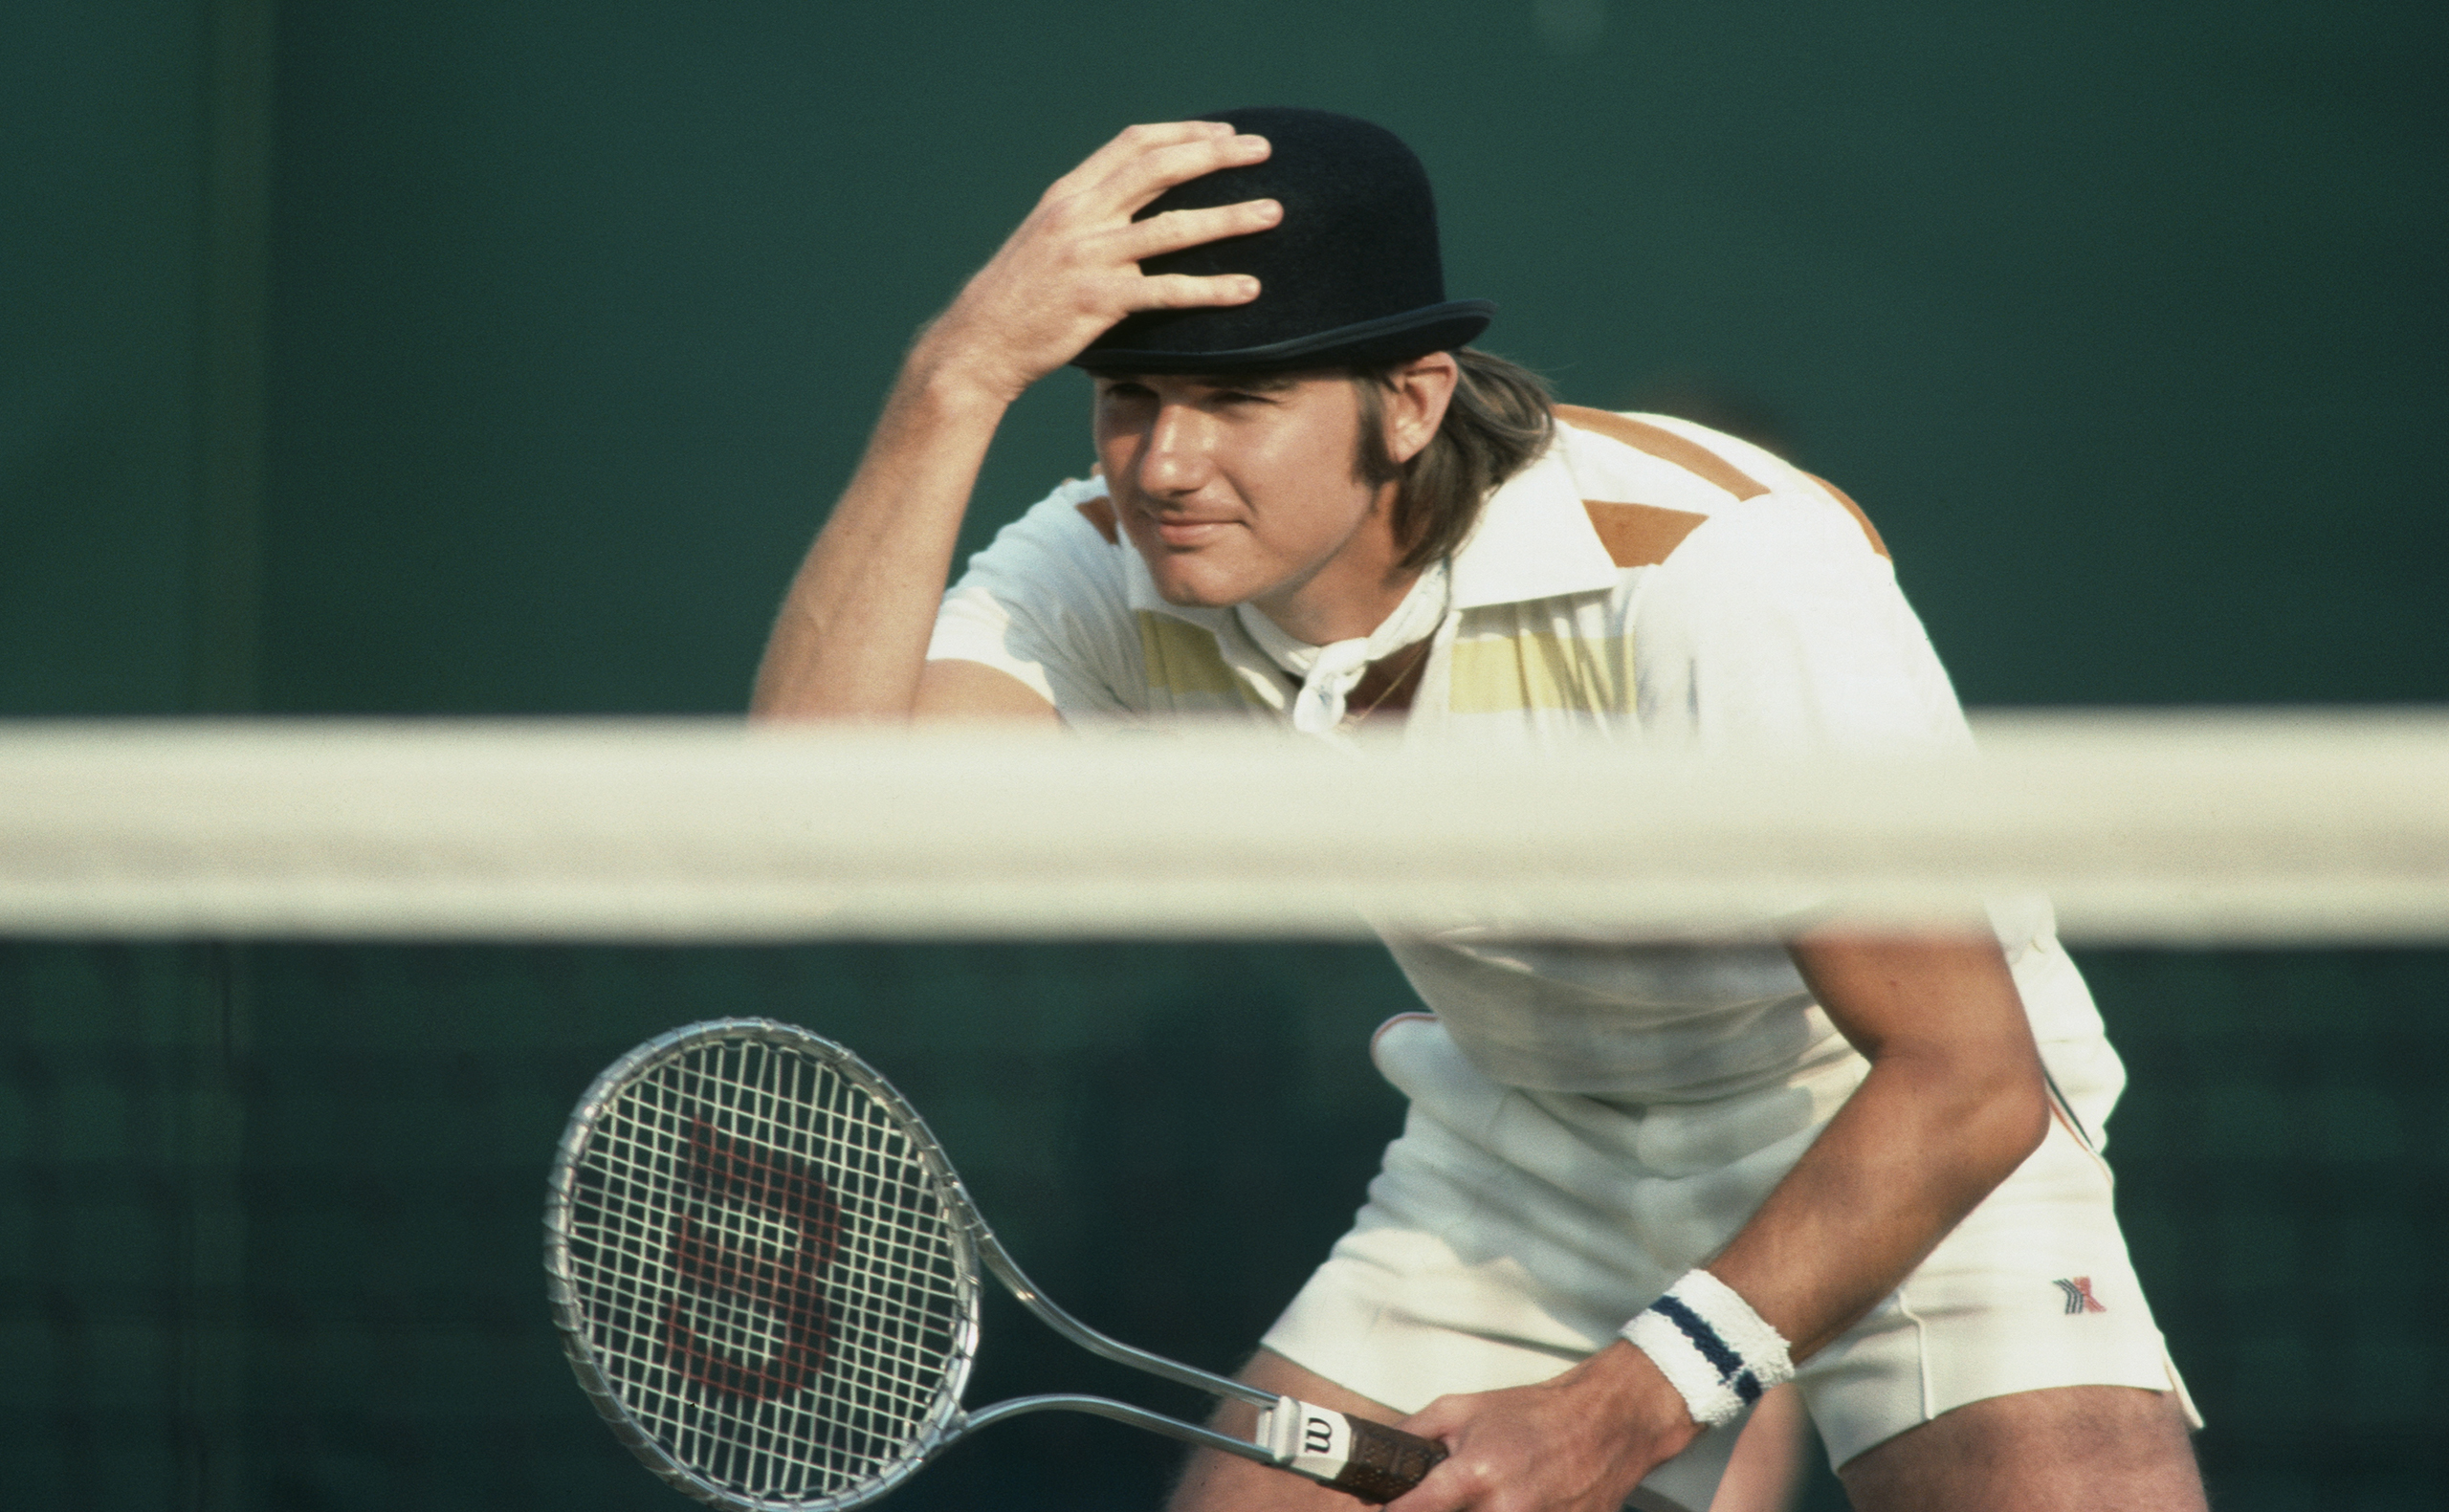 Jimmy Connors clowns and jokes with the spectators by wearing a bowler hat during a men's doubles match in 1976